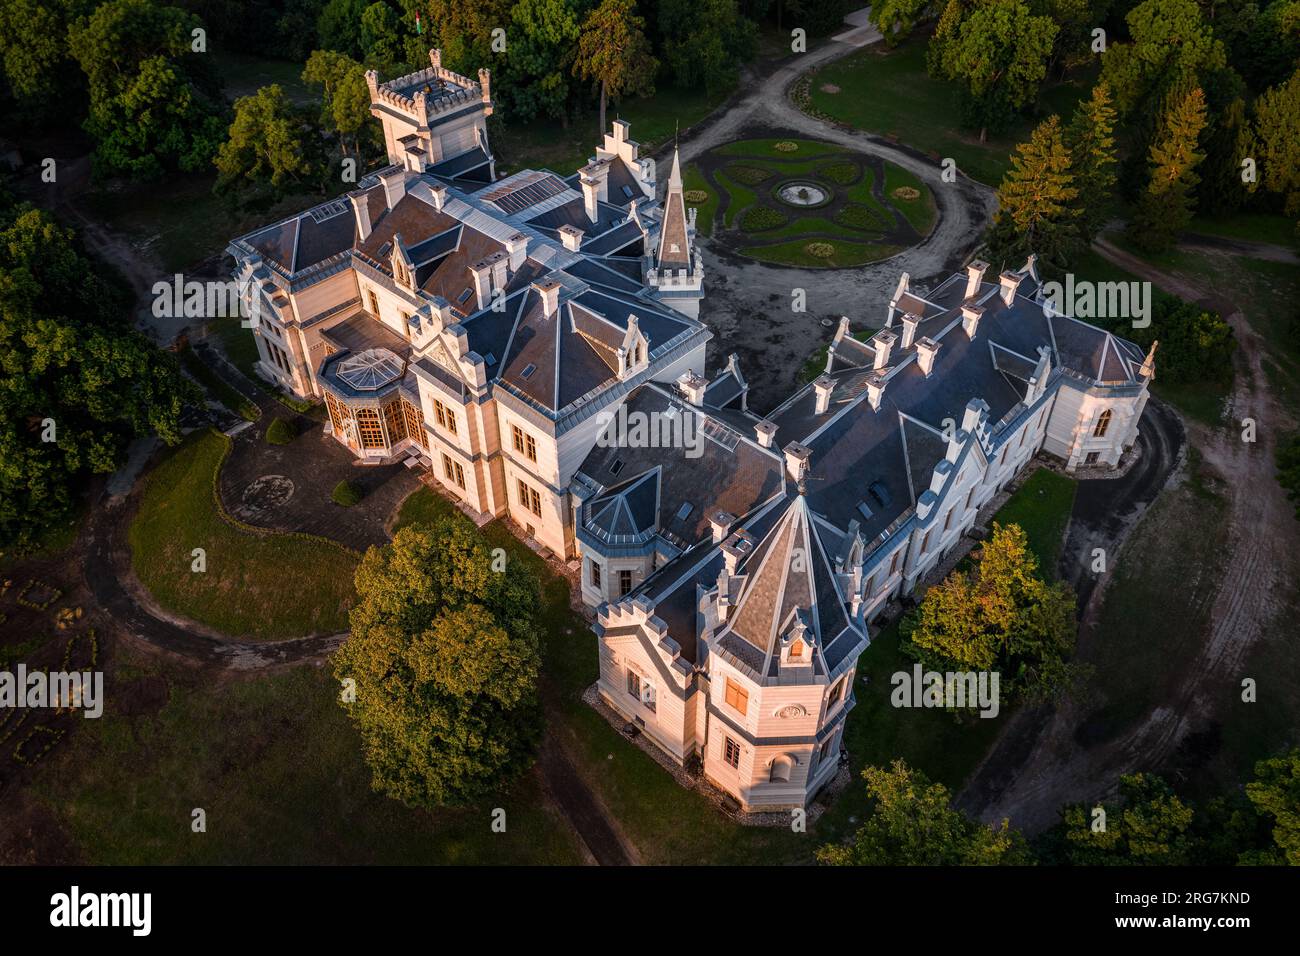 Nadasdladany, Hungary - Aerial view of the beautiful Nadasdy Mansion (Nadasdy-kastely) at the small village of Nadasdladany in warm sunlight on a summ Stock Photo